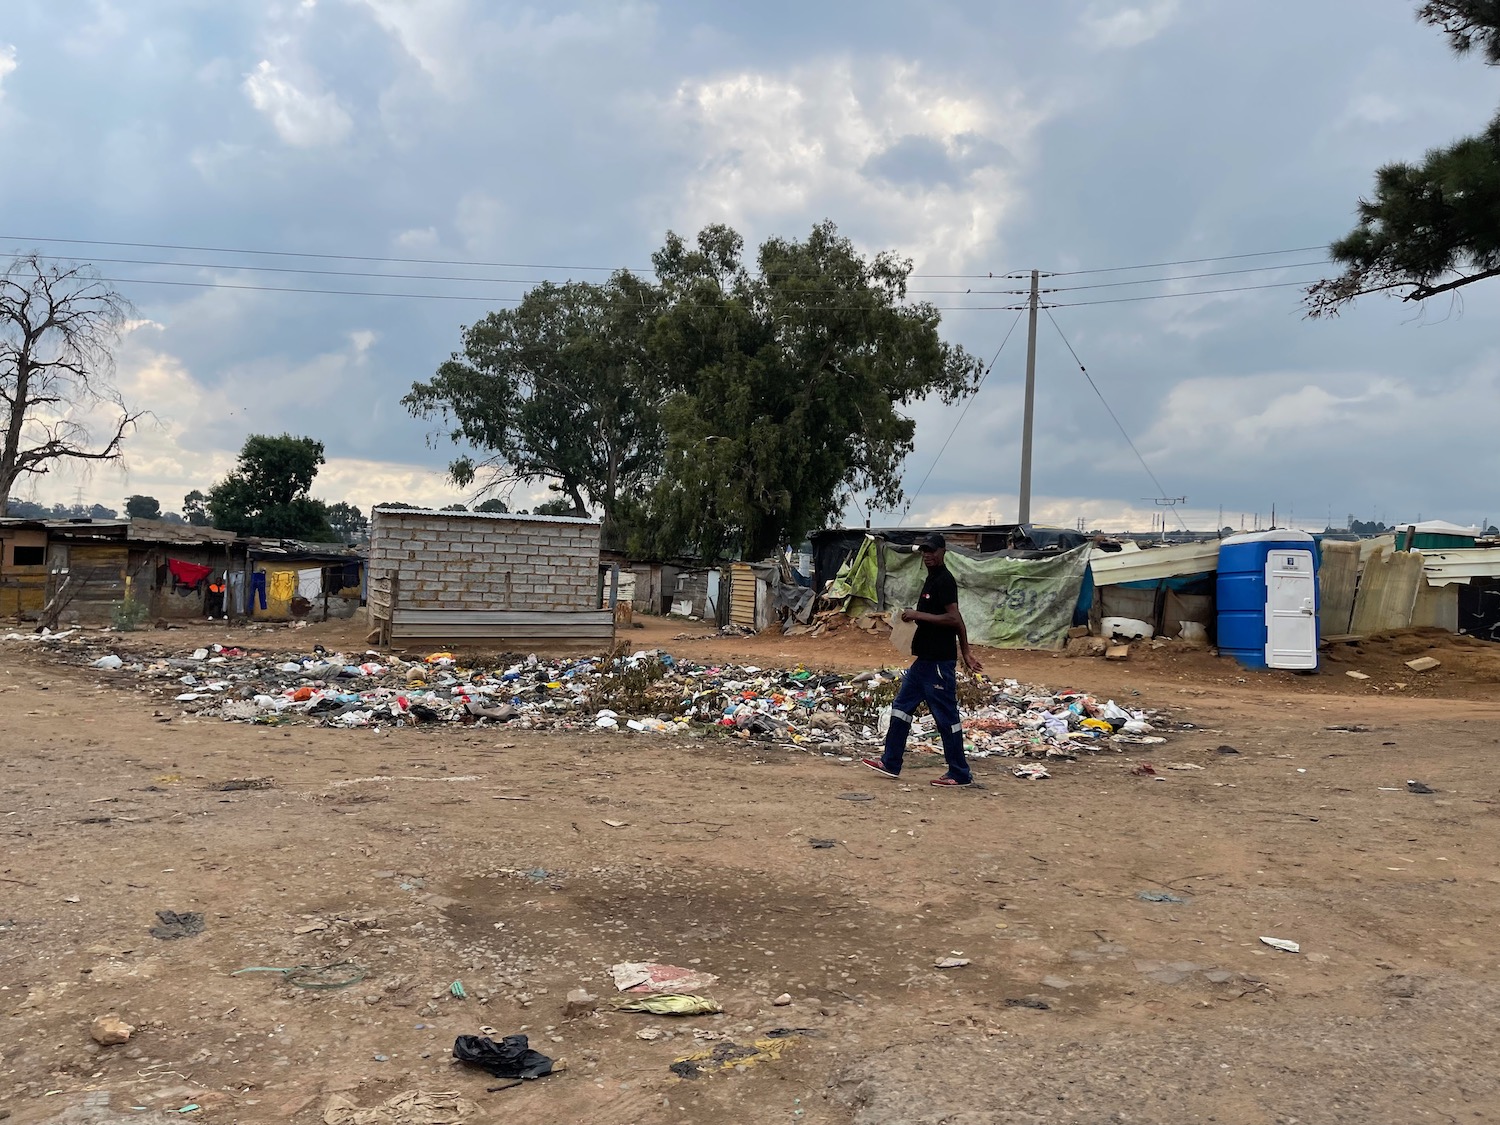 a man walking in a dirt area with garbage